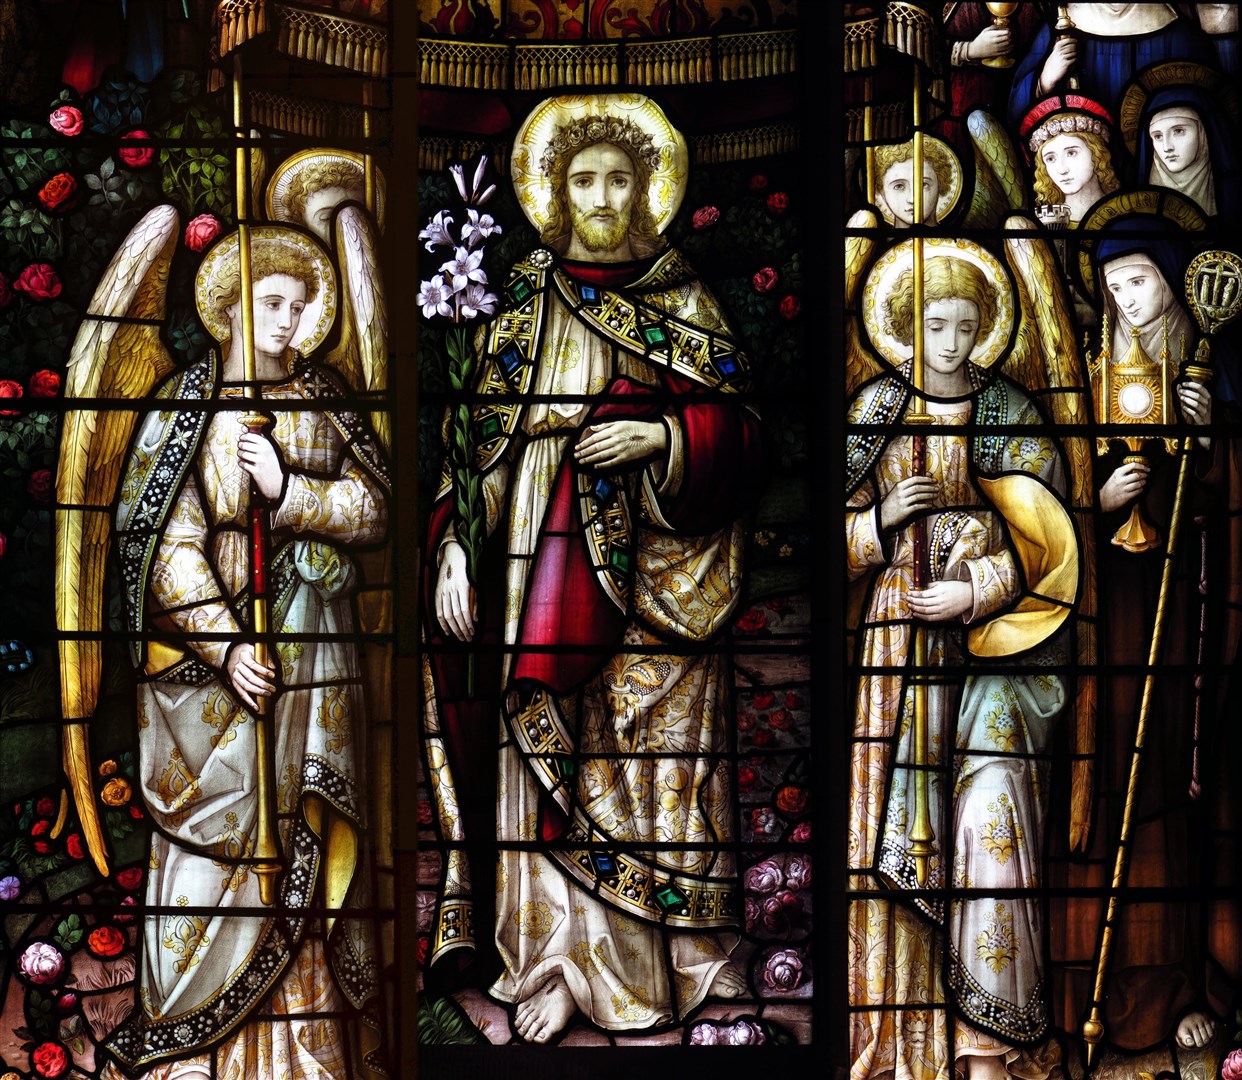 The stained glass was designed especially for the Sisters of Mercy because it only containsfemale saints. Though the Sisters of Mercy have gone, the Dominican Sisters also enjoy contemplating it.